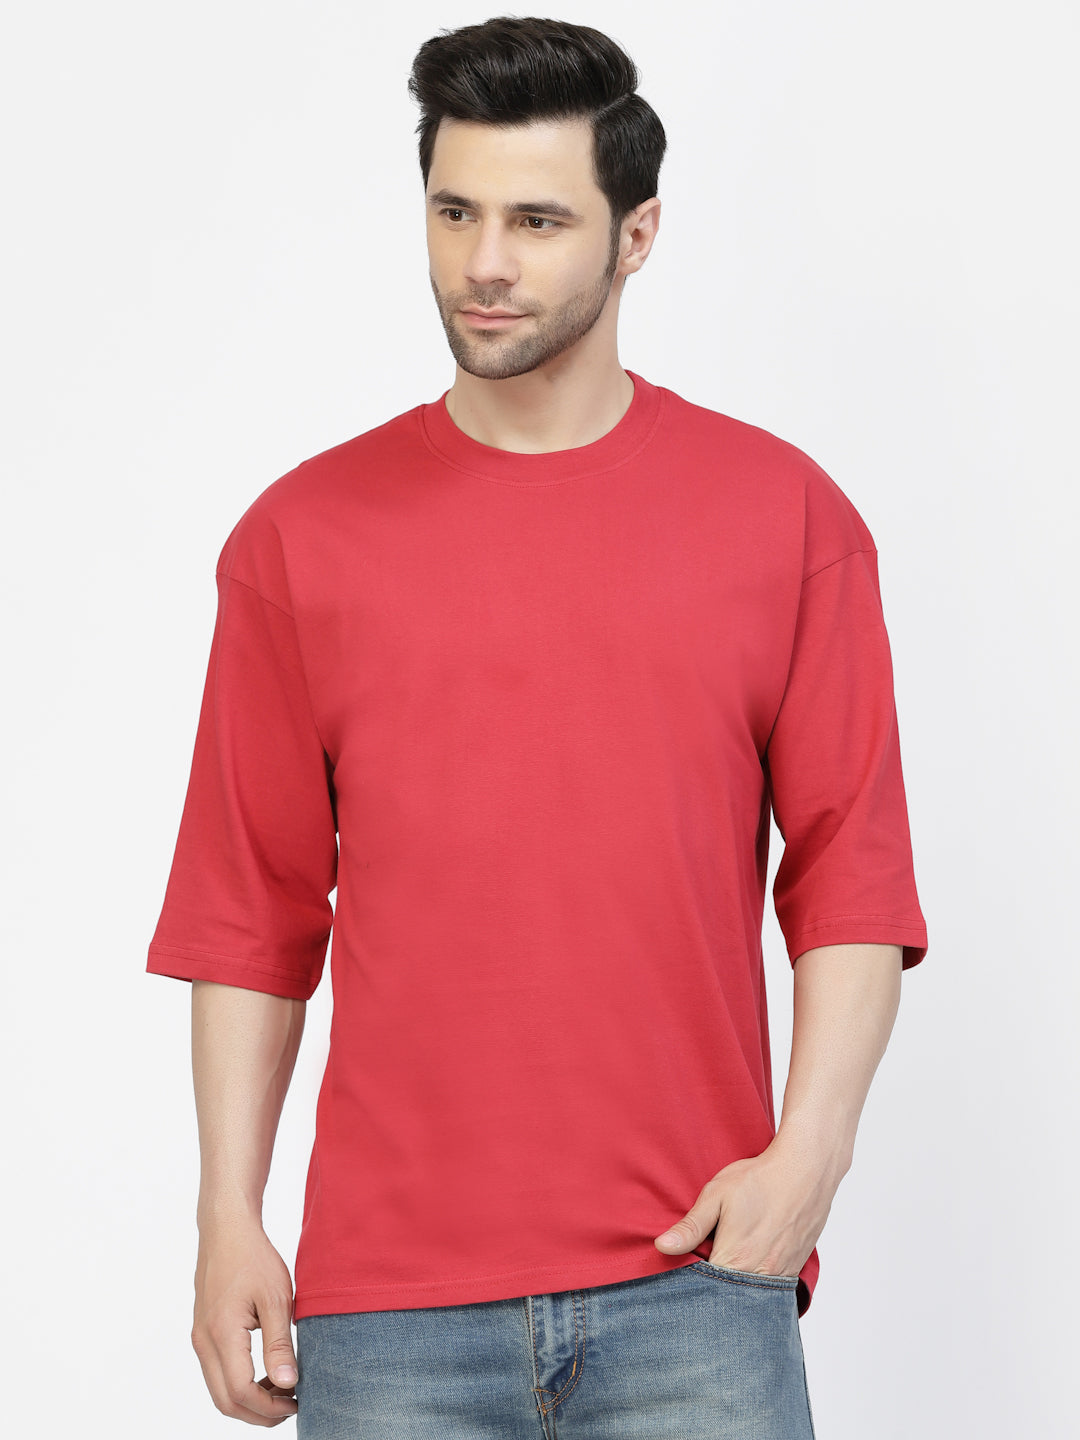 GavinParis: The Epitome of Style and Comfort in Oversized T-Shirts